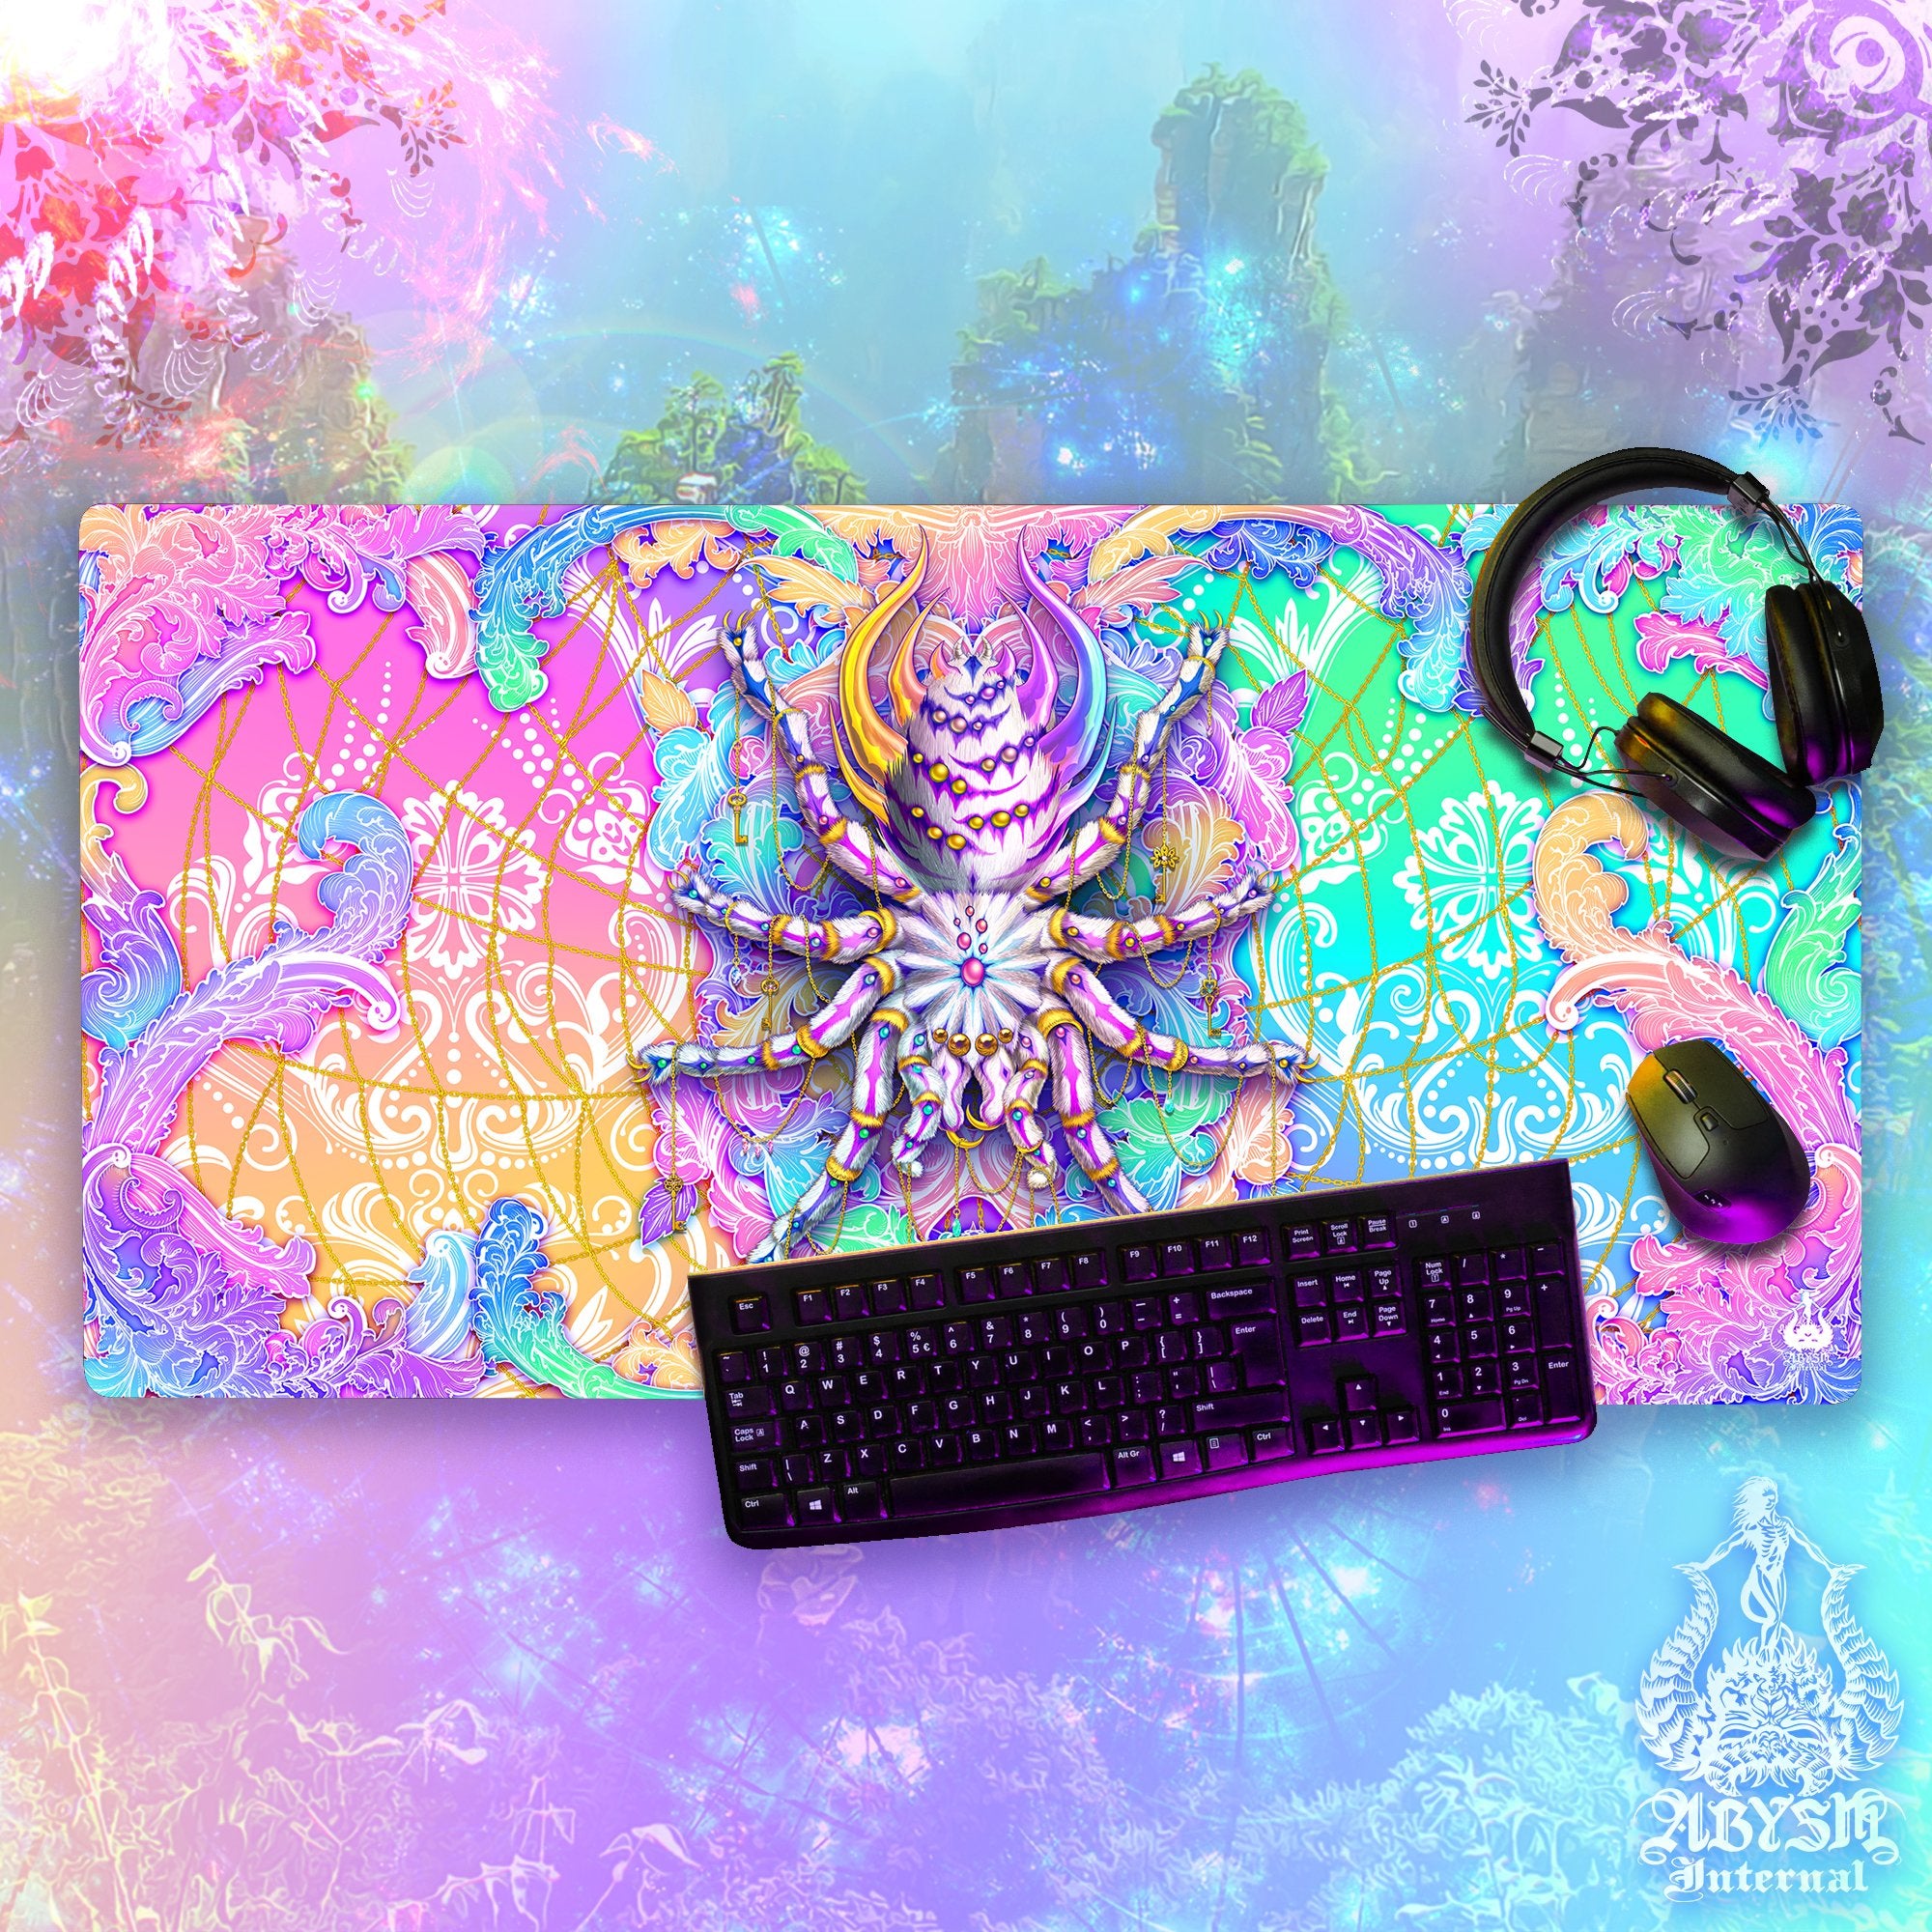 Psychedelic Workpad, Pastel Desk Mat, Spider Gaming Mouse Pad, Girl Gamer Table Protector Cover, Tarantula Art Print - Abysm Internal